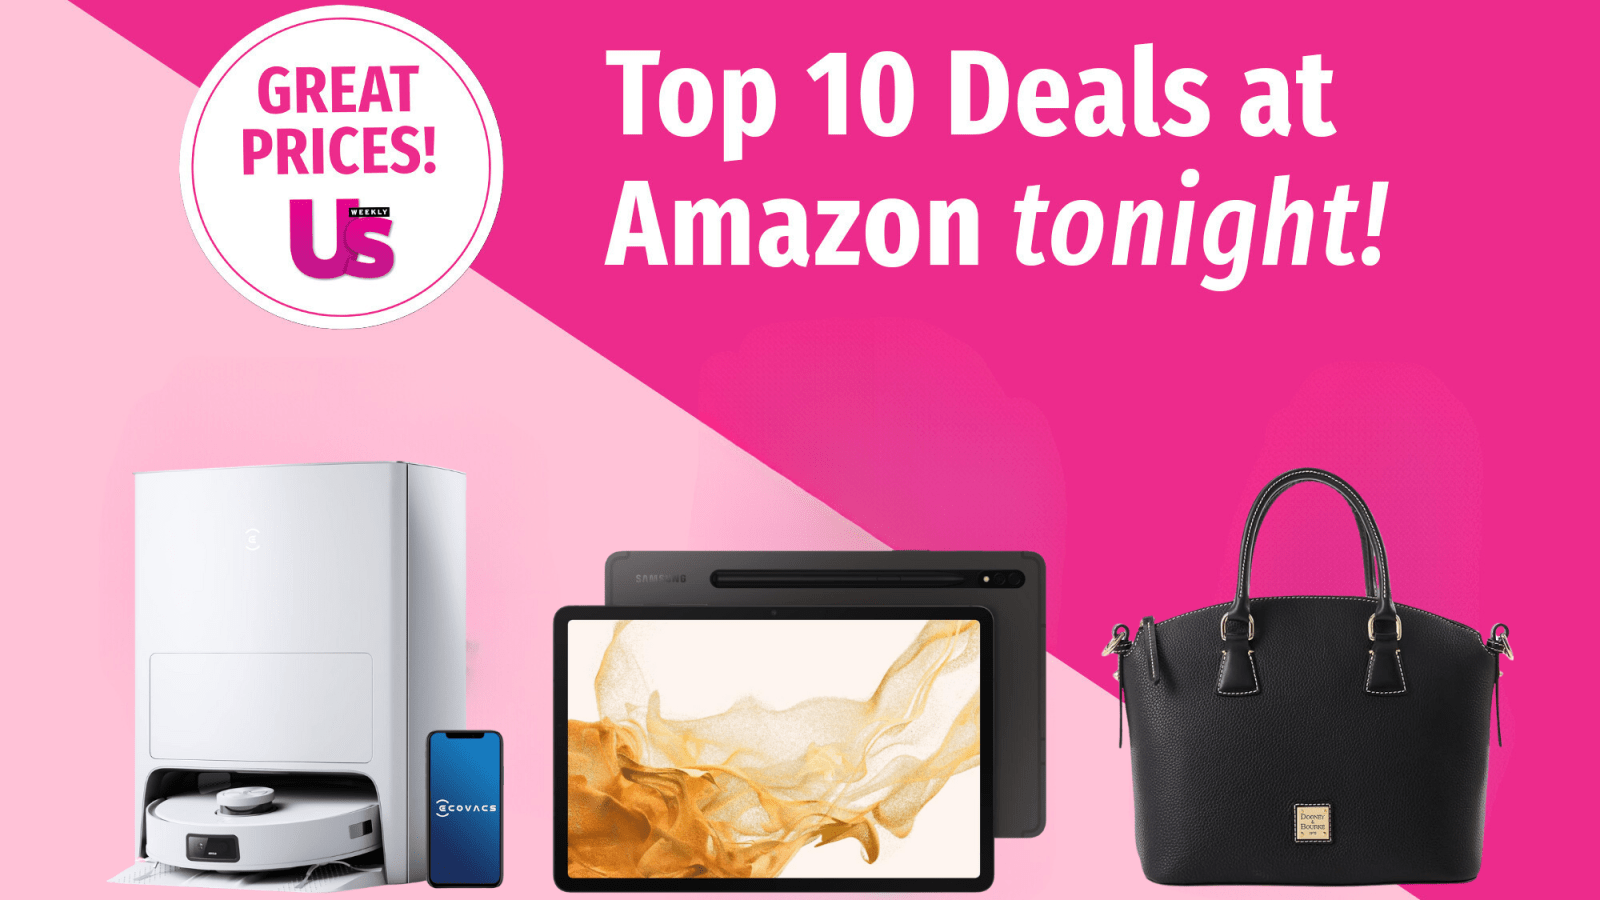 The 10 Best Amazon Deals Tonight That Are 40% Off or More